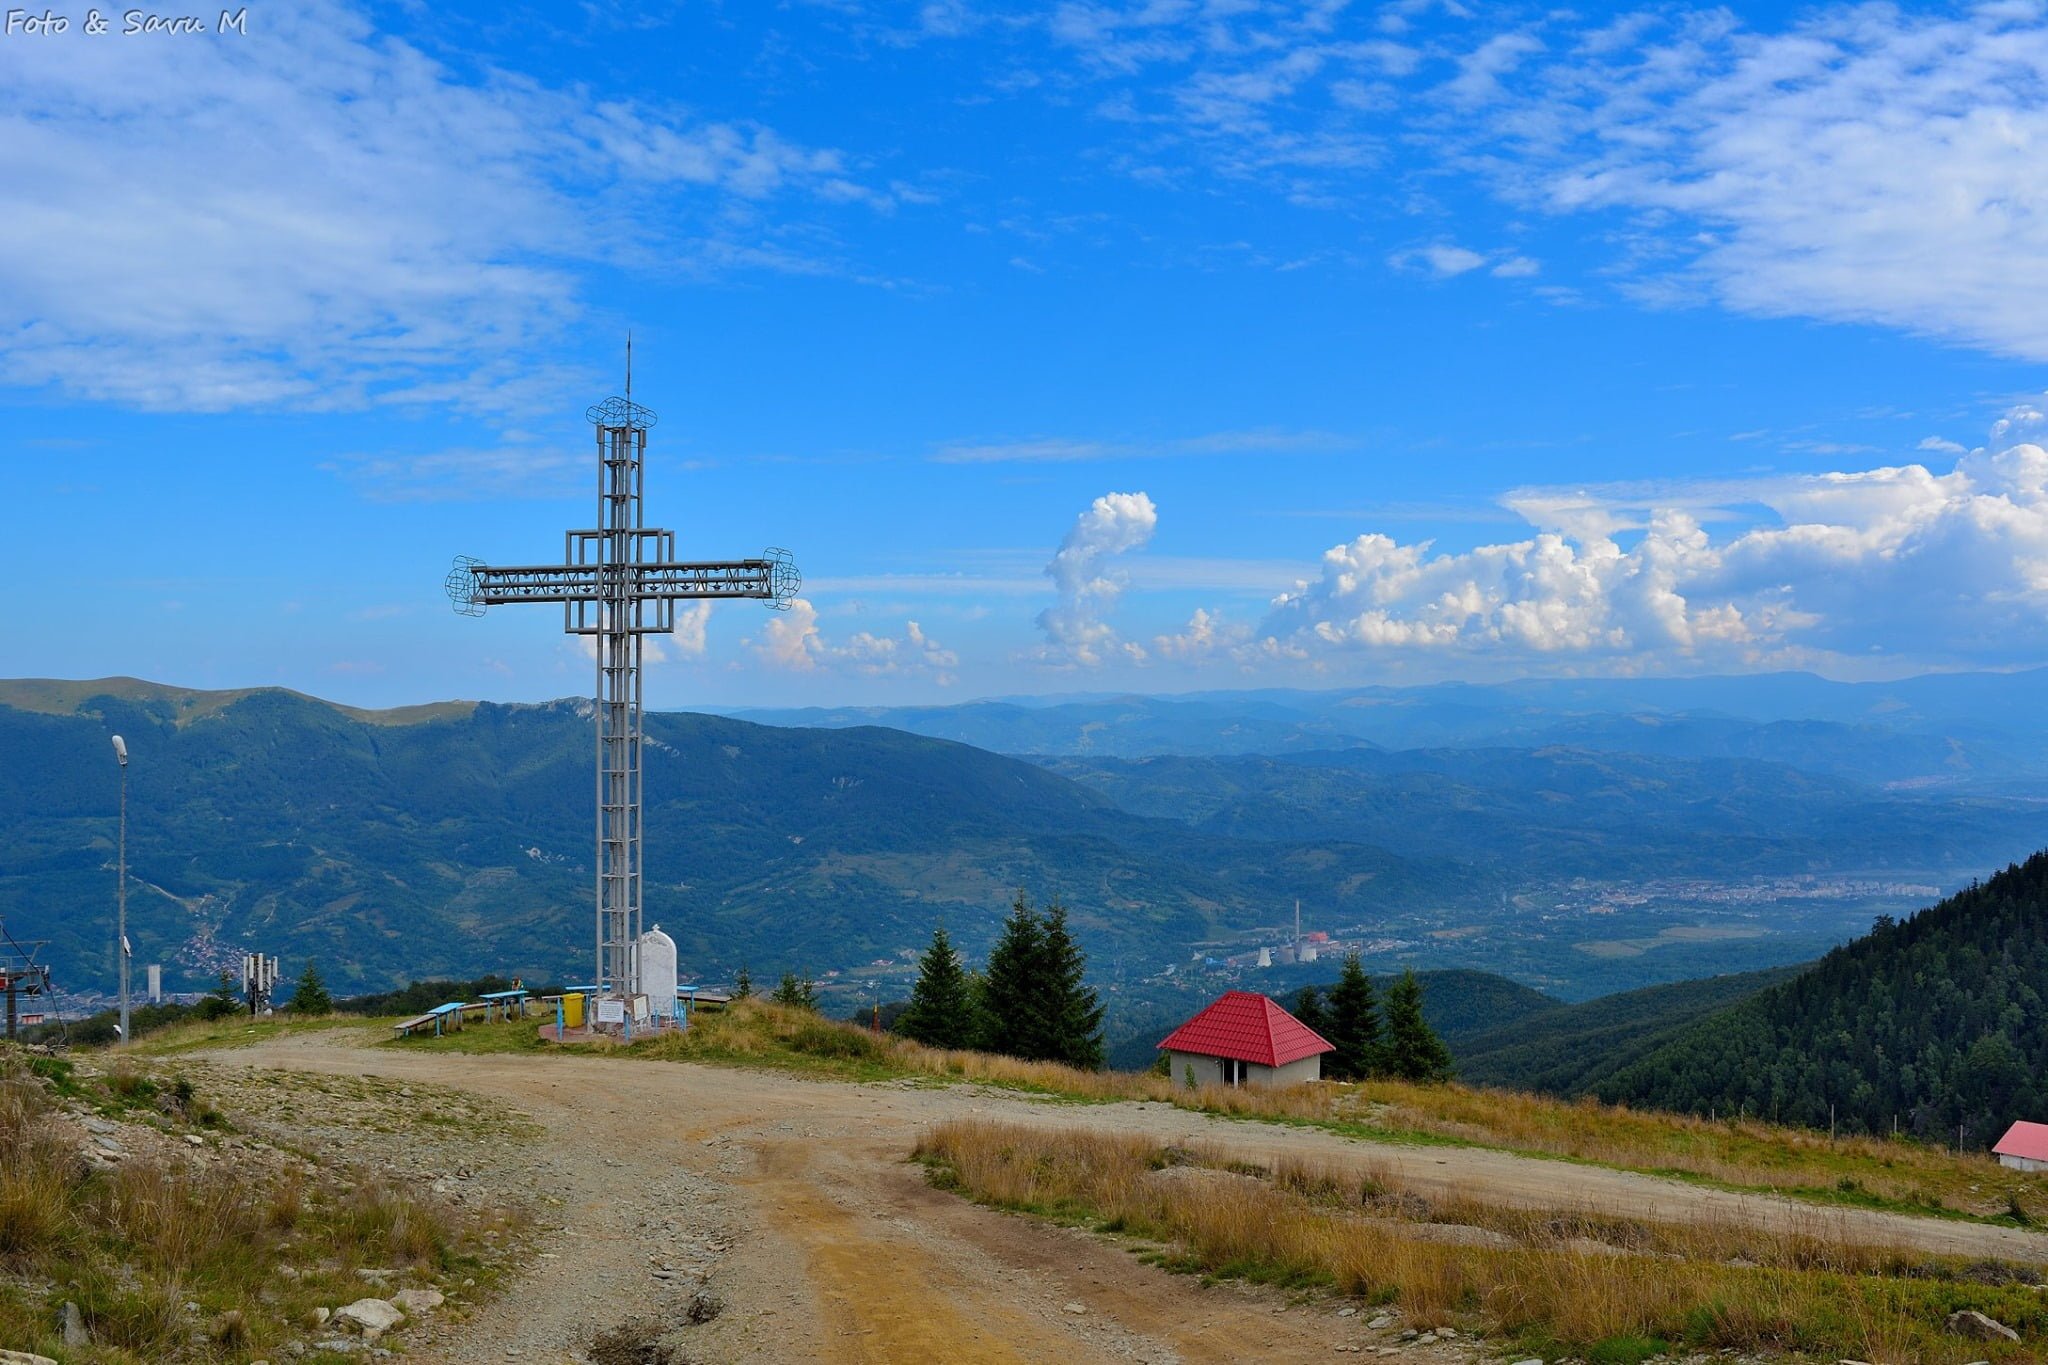 Straja Hermitage – the mountain church was built in 3 months, 3 weeks and 3 days